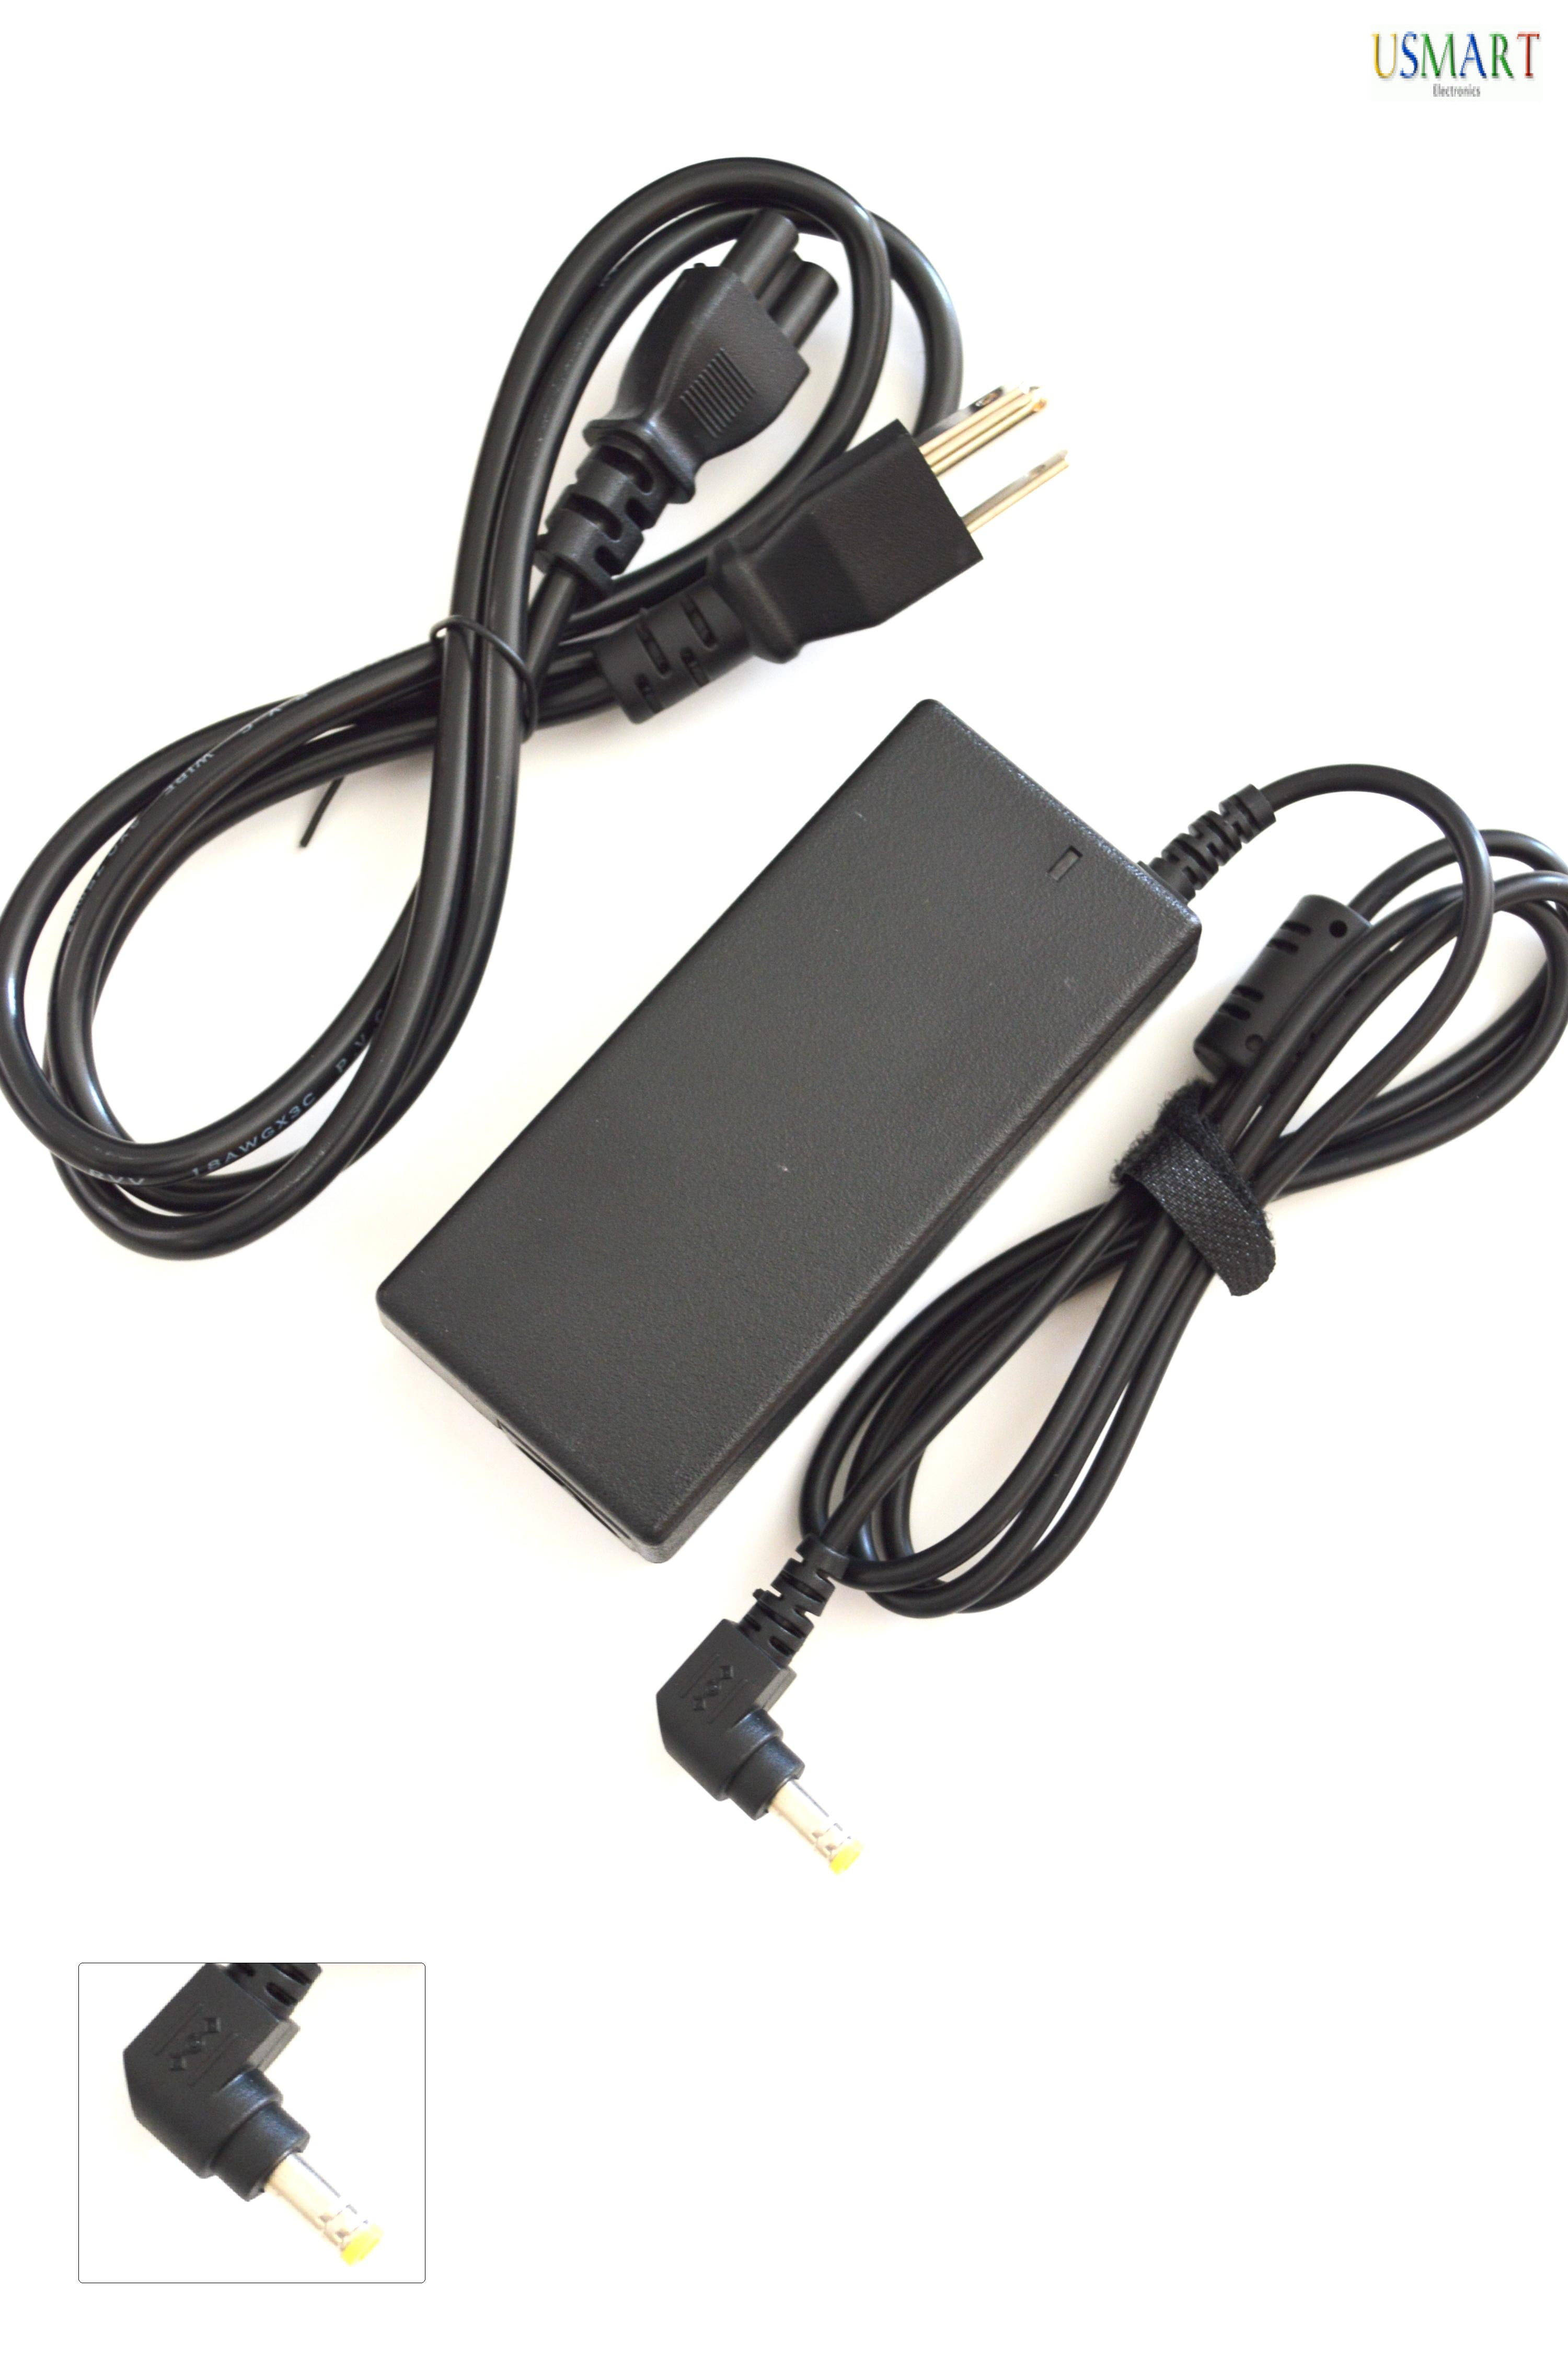 Usmart New AC Power Adapter Laptop Charger For Asus U6E-A1 Laptop Notebook  Ultrabook Chromebook PC Power Supply Cord 3 years warranty 